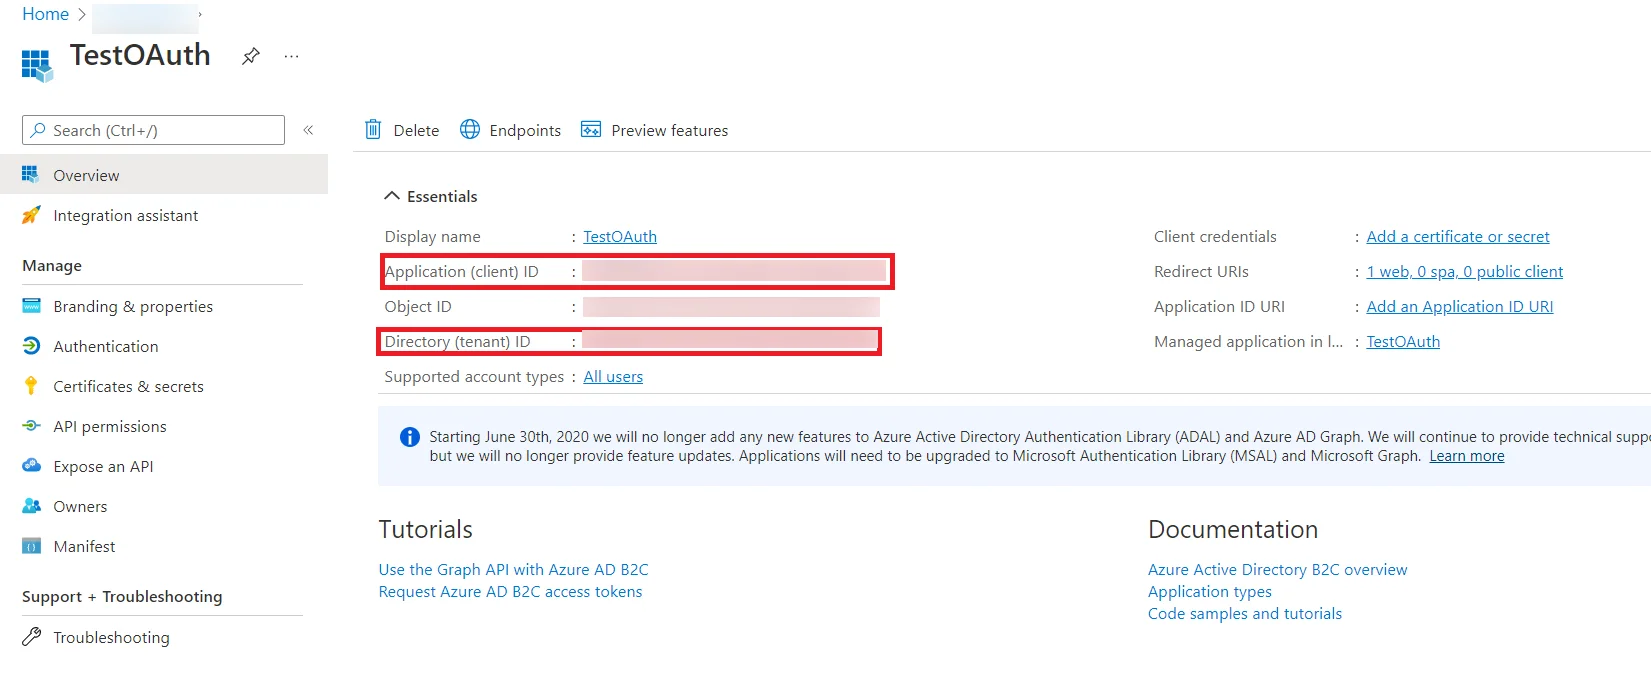 nopCommerce OAuth Single Sign-On (SSO) using Office365 as IDP - Directory ID